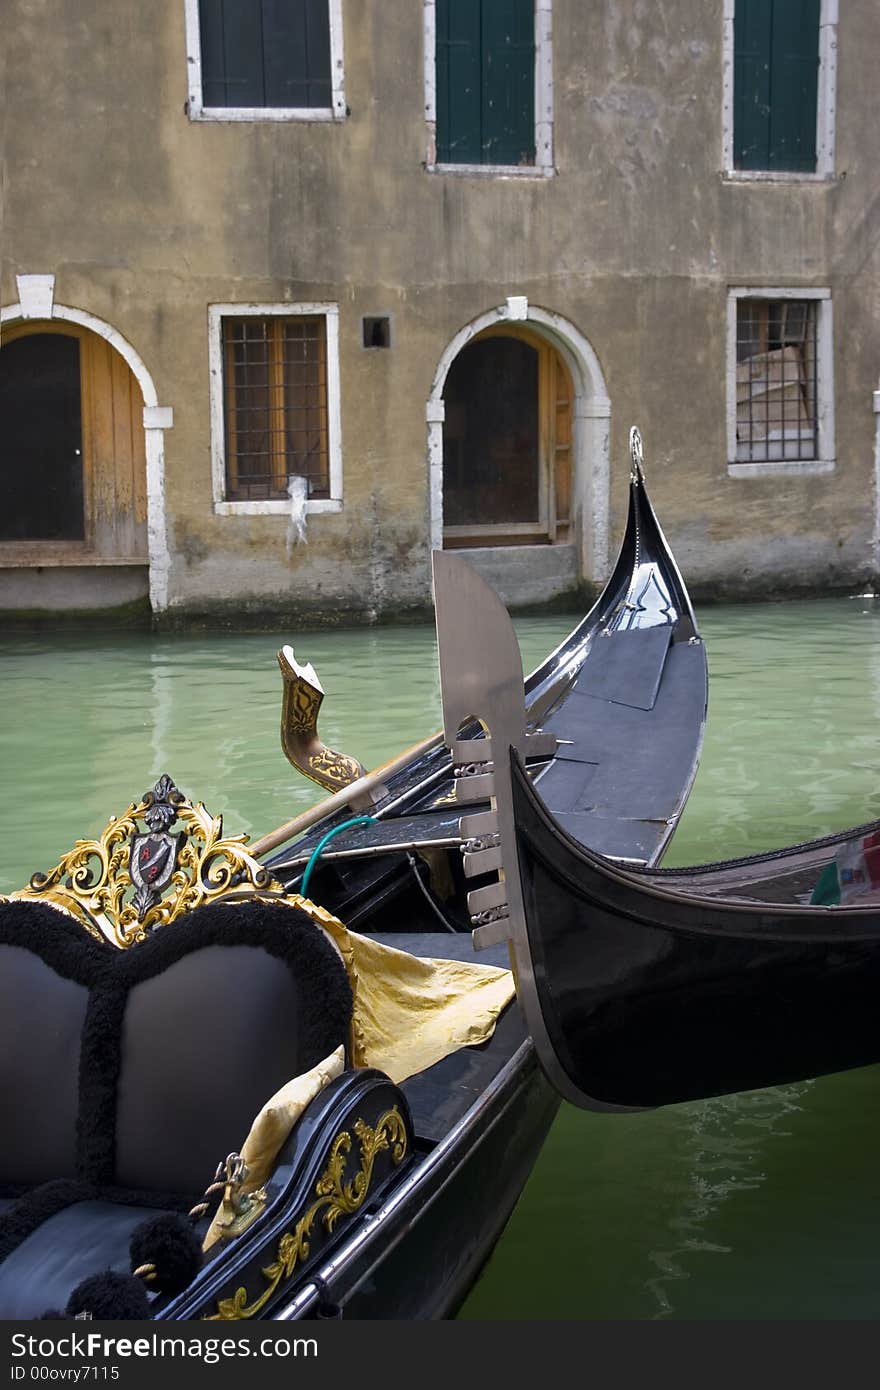 Two venecian gondolas in canal on the background of old ncient houses